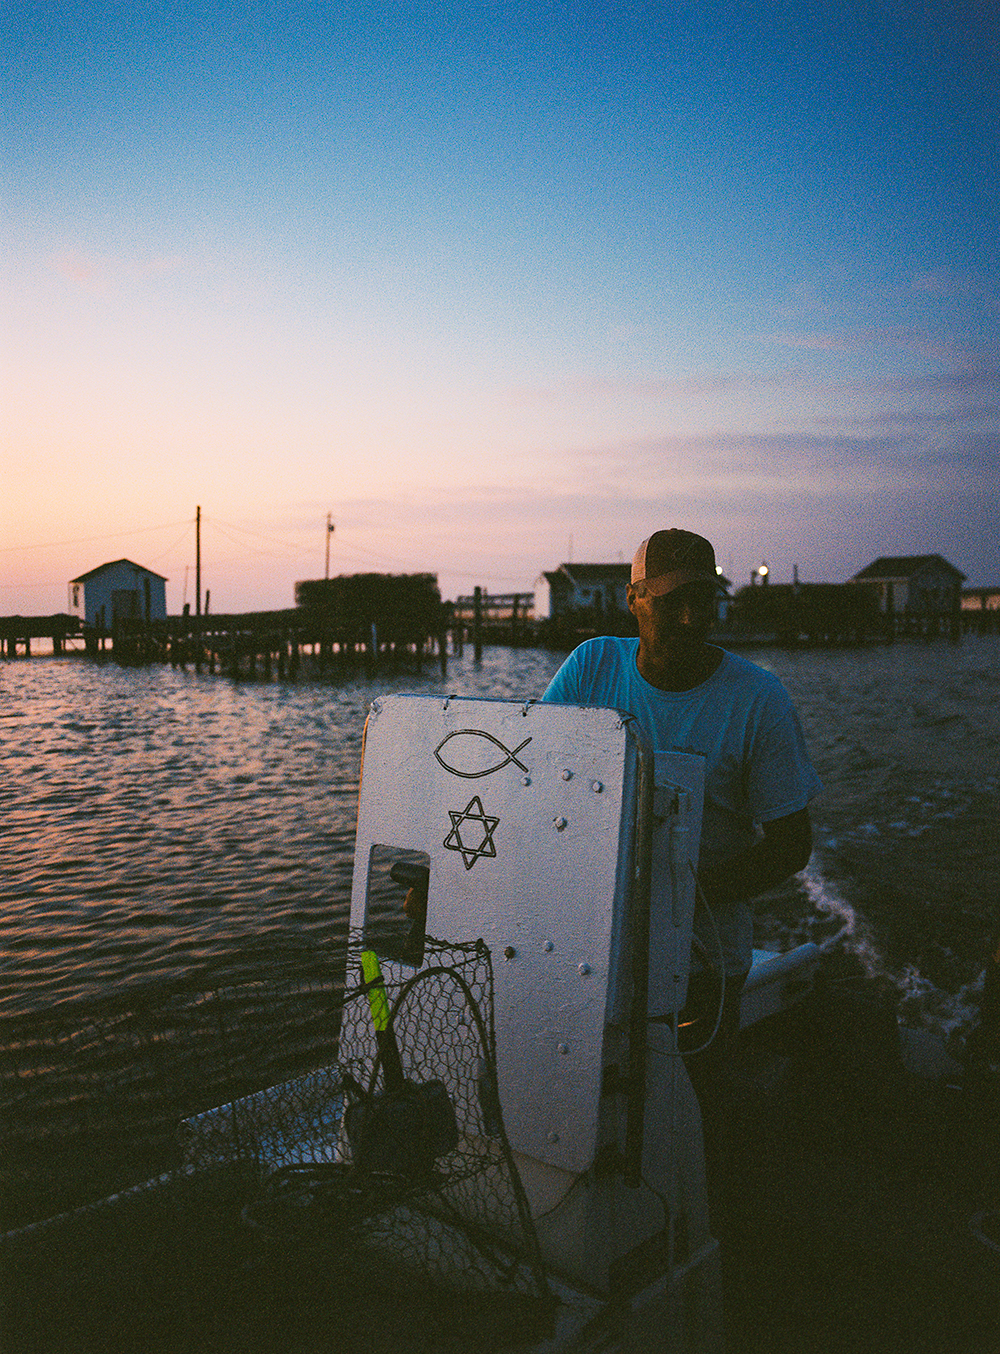 Photograph by Gunner Hughes of boater at sunset on Tangier Island, Chesapeake Bay